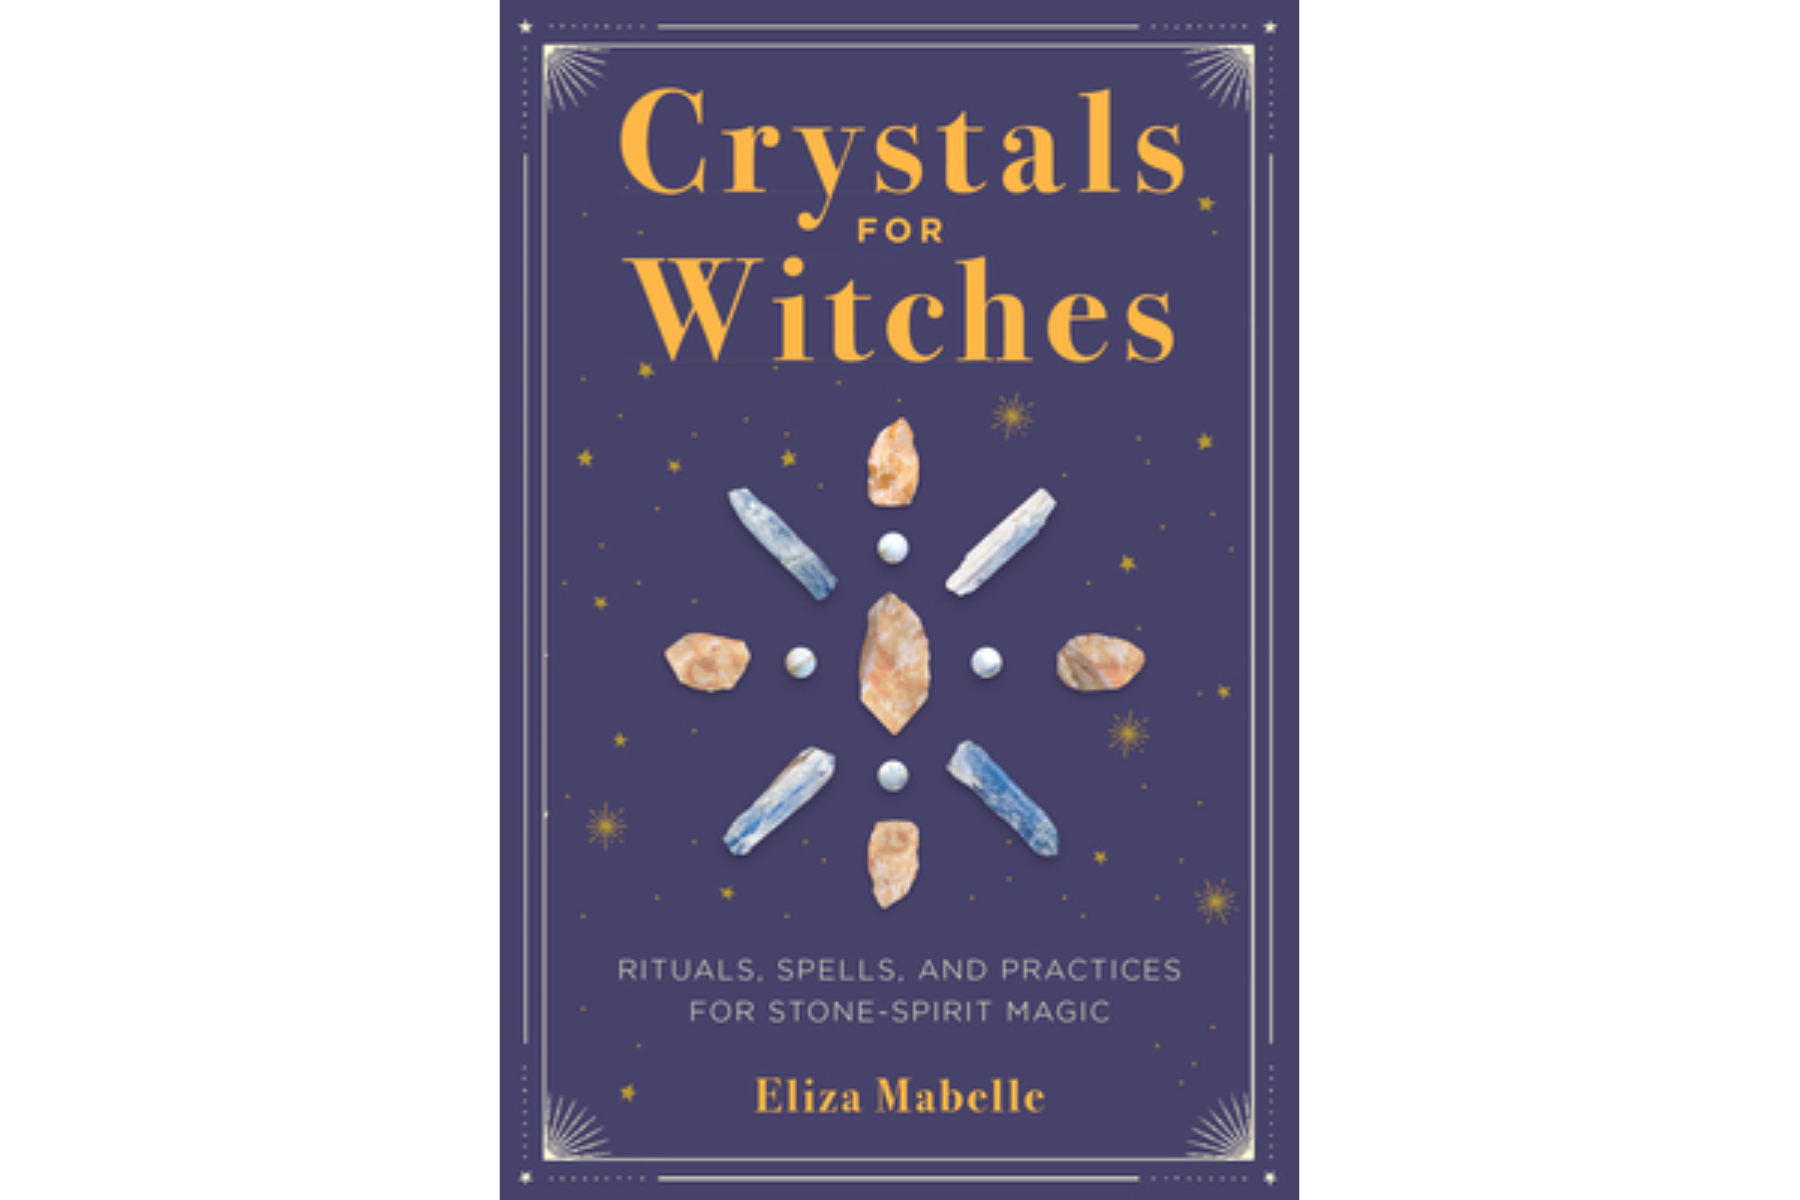 Crystals for Witches book